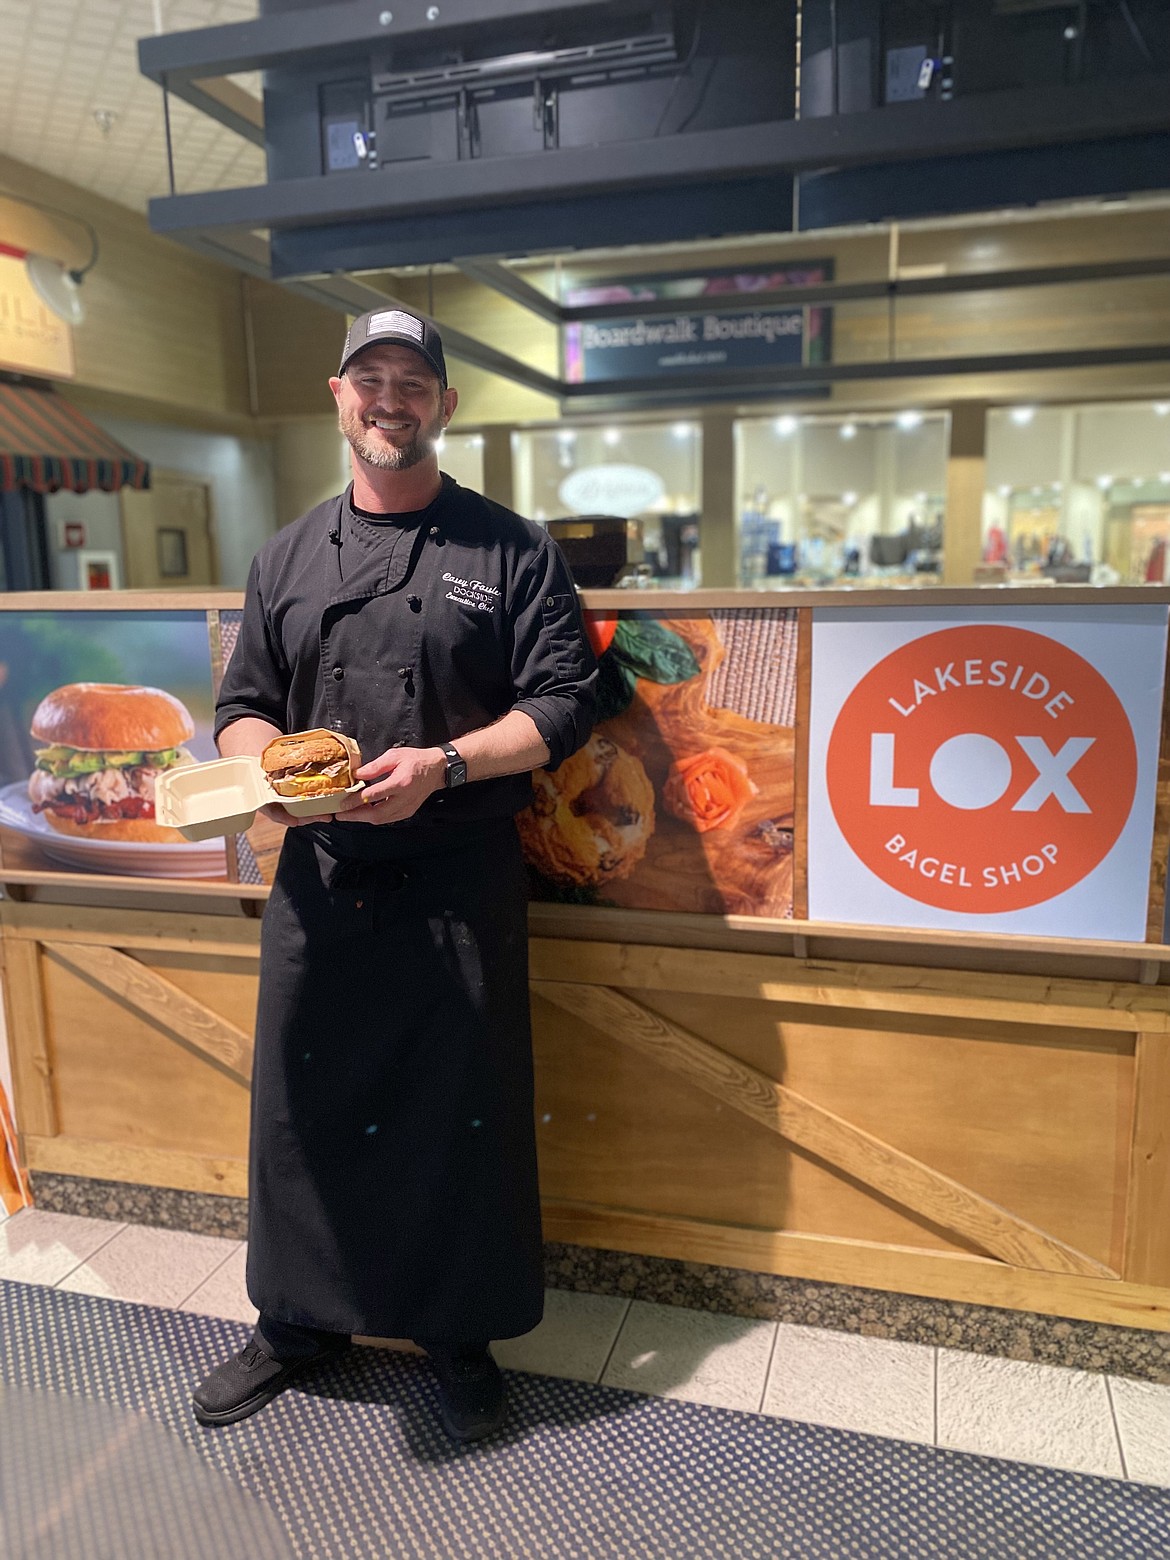 Chef Casey Fassler holding "The Texan" bagel from the Lakeside Lox bagel shop.